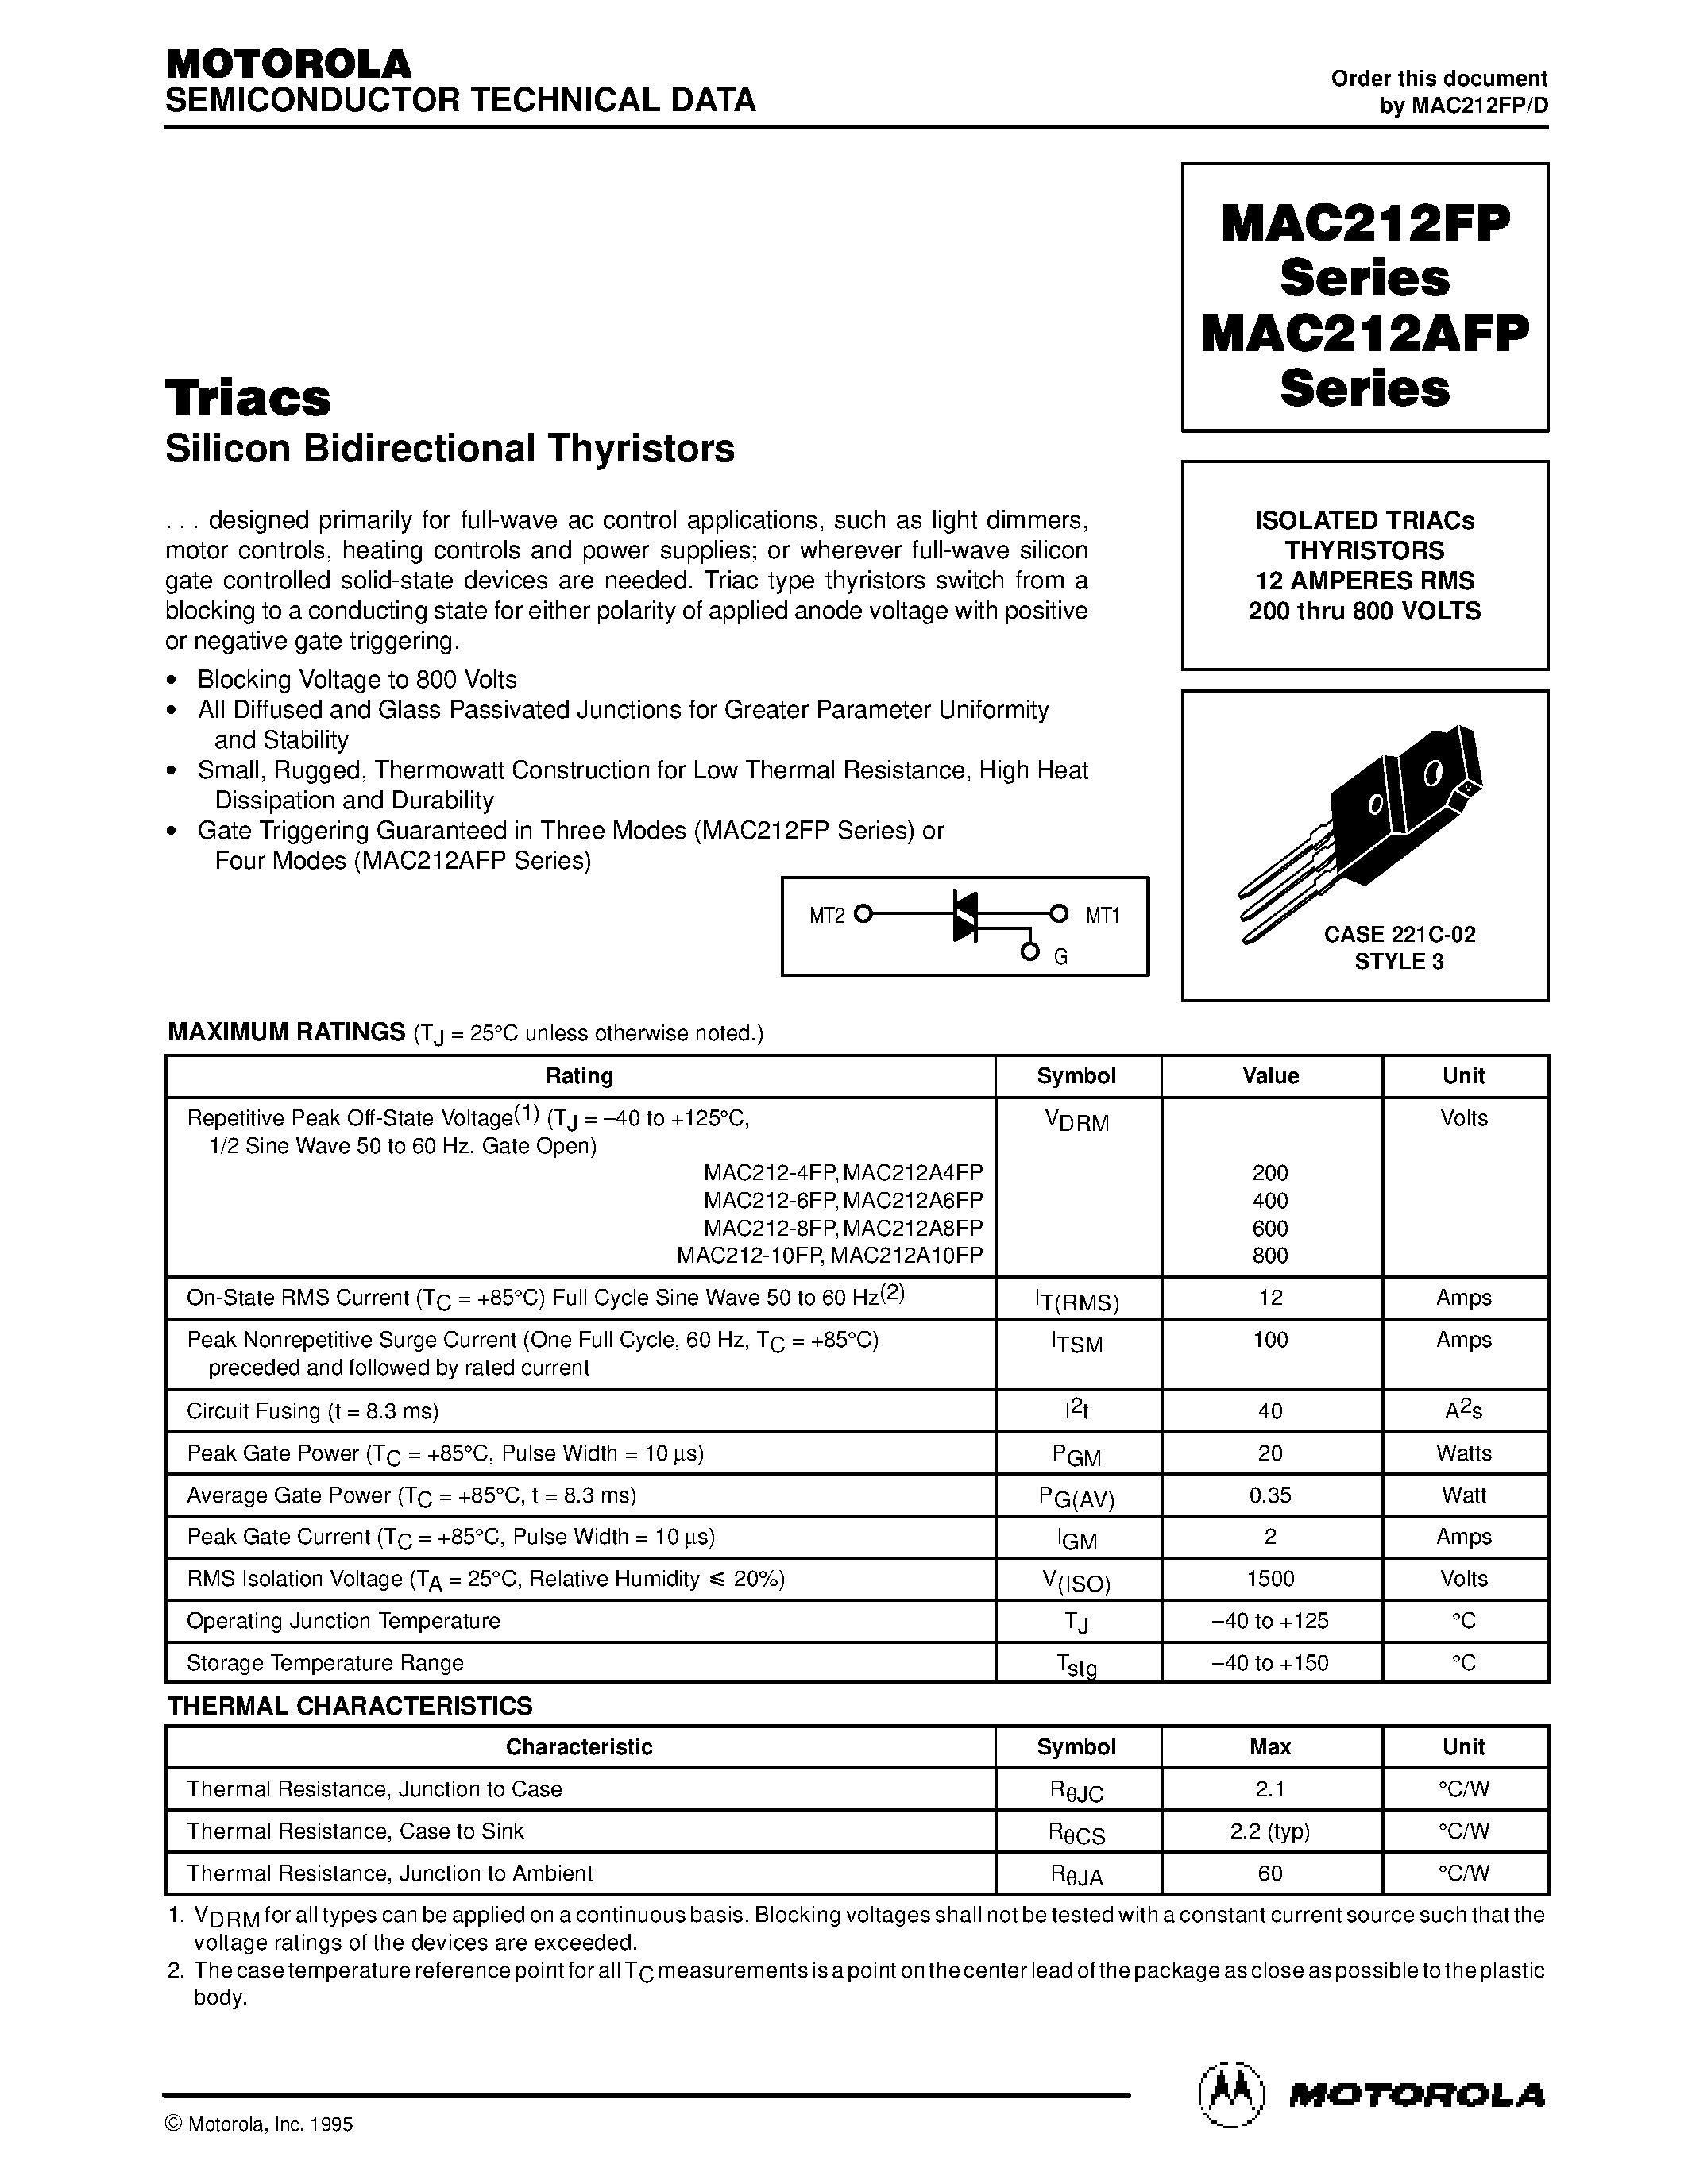 Datasheet MAC212A10FP - ISOLATED TRIACs THYRISTORS 12 AMPERES RMS 200 thru 800 VOLTS page 1